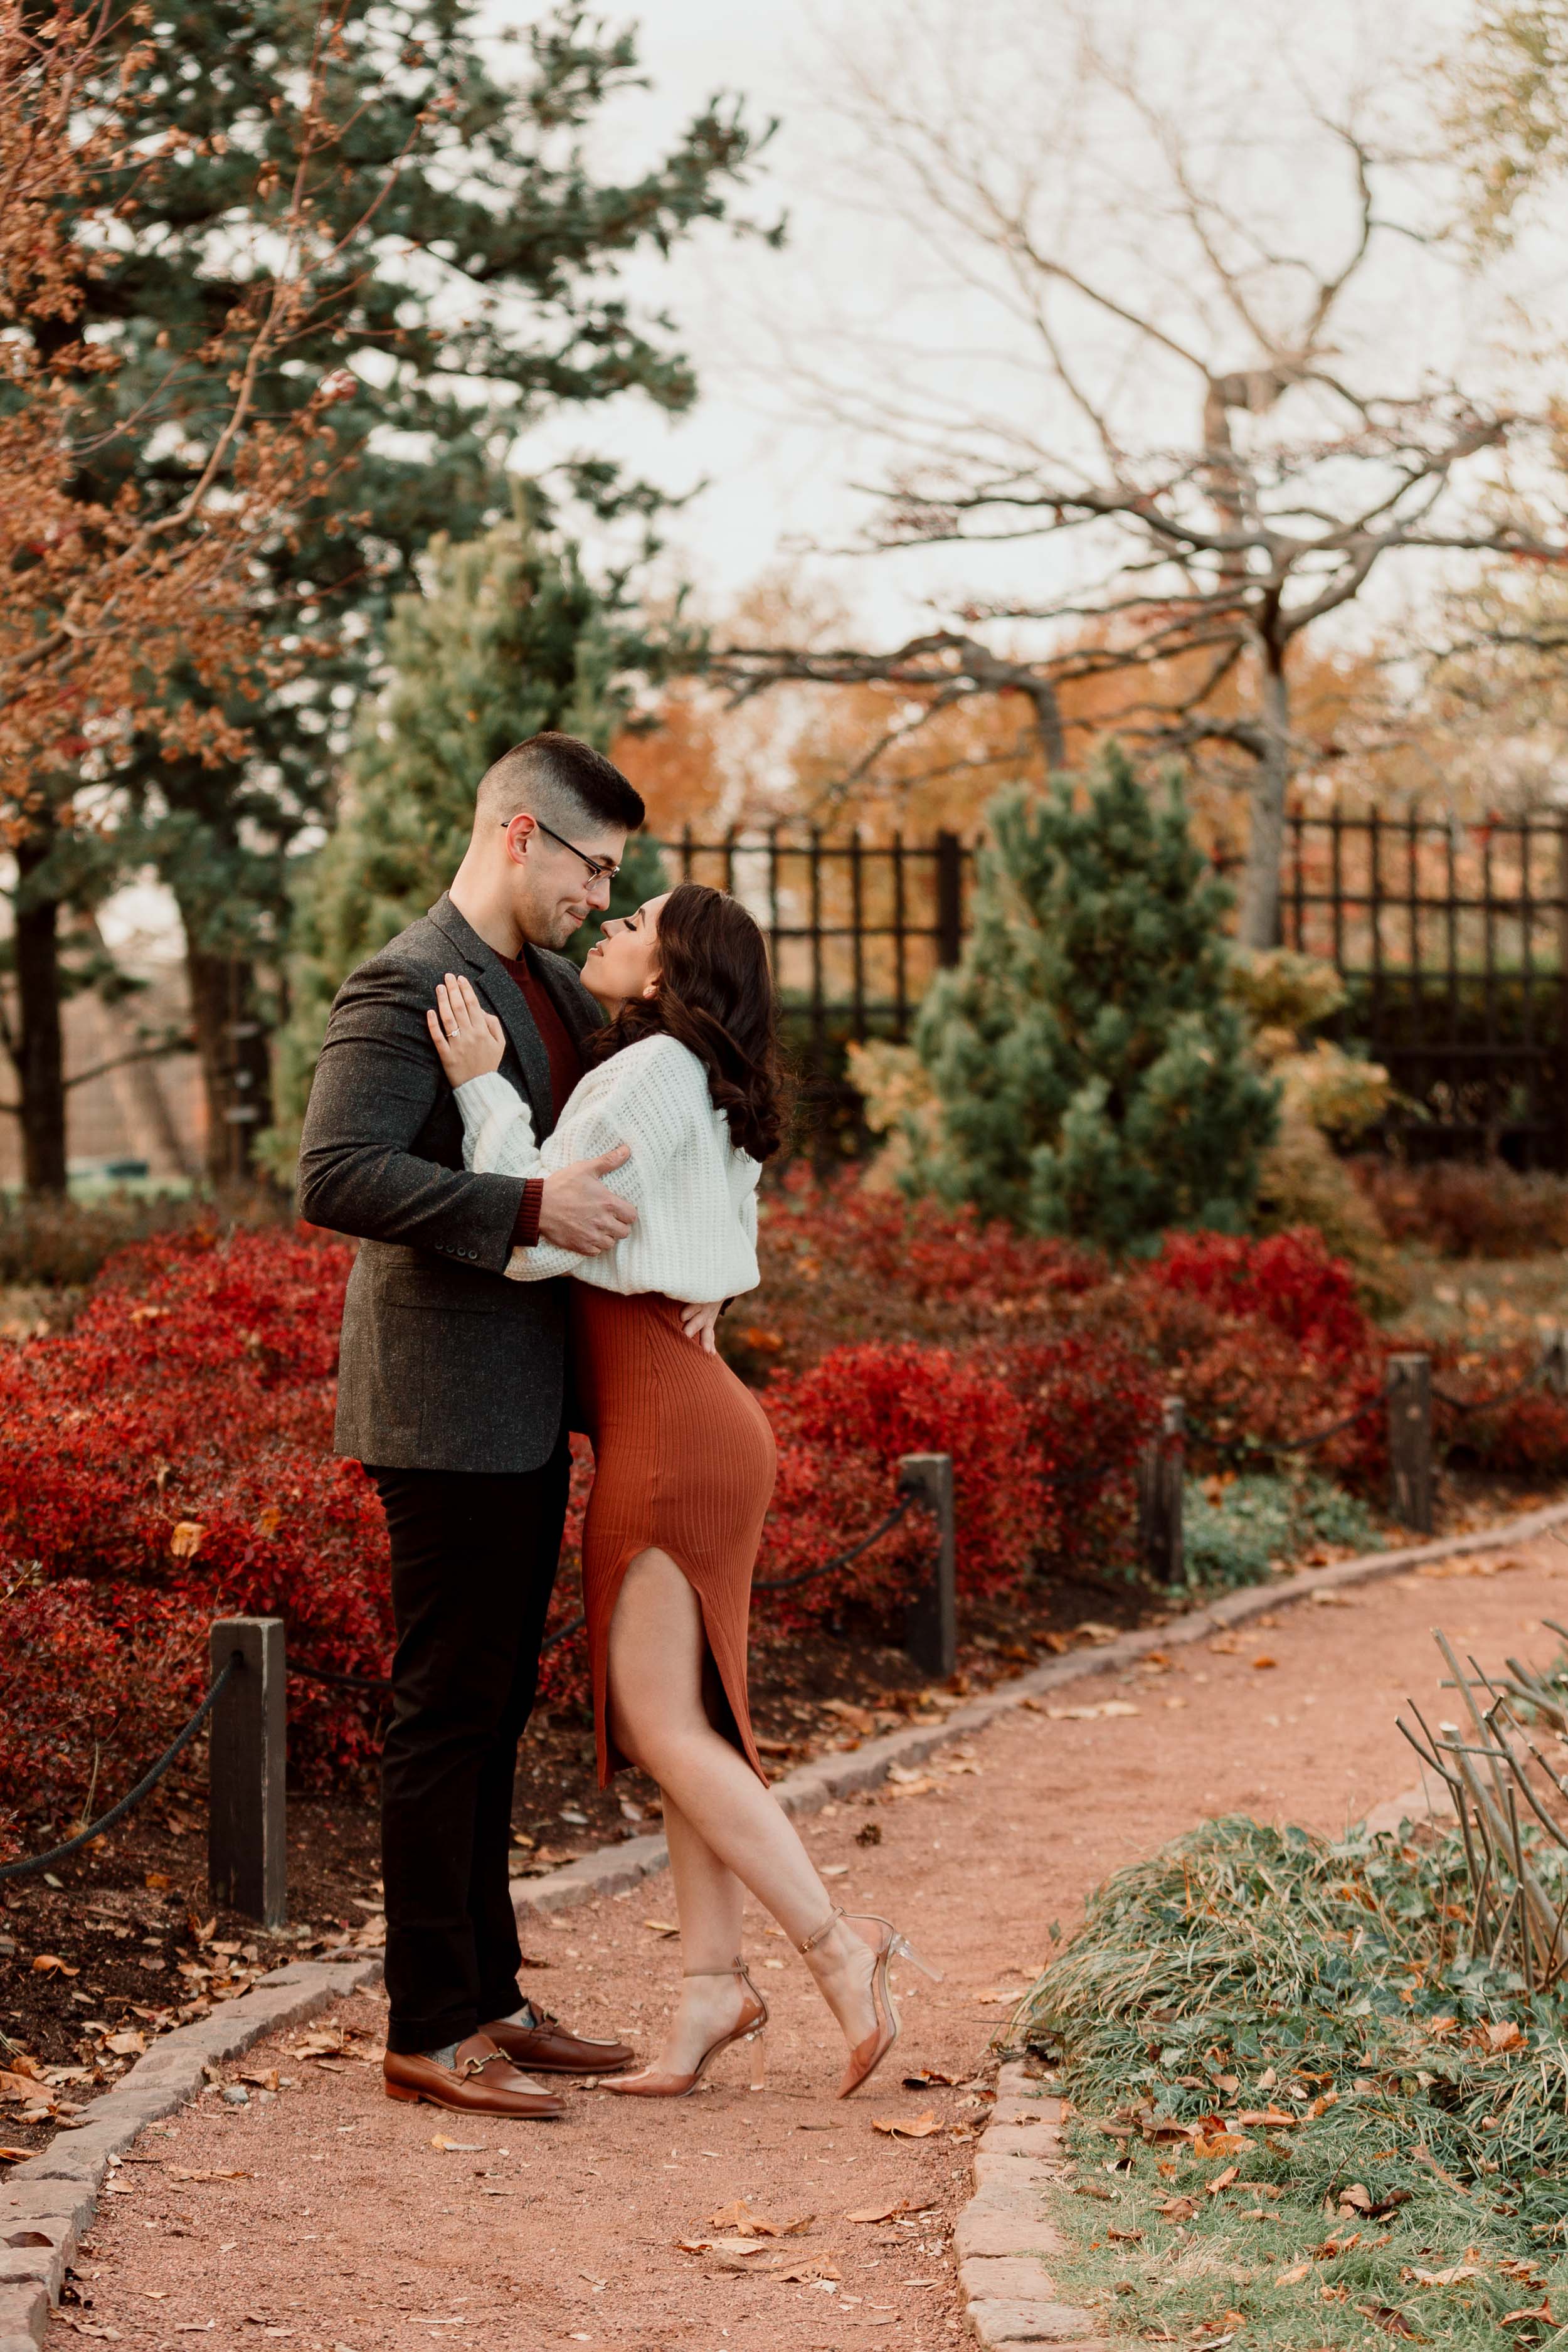 Sweet poses for outdoor engagement photos